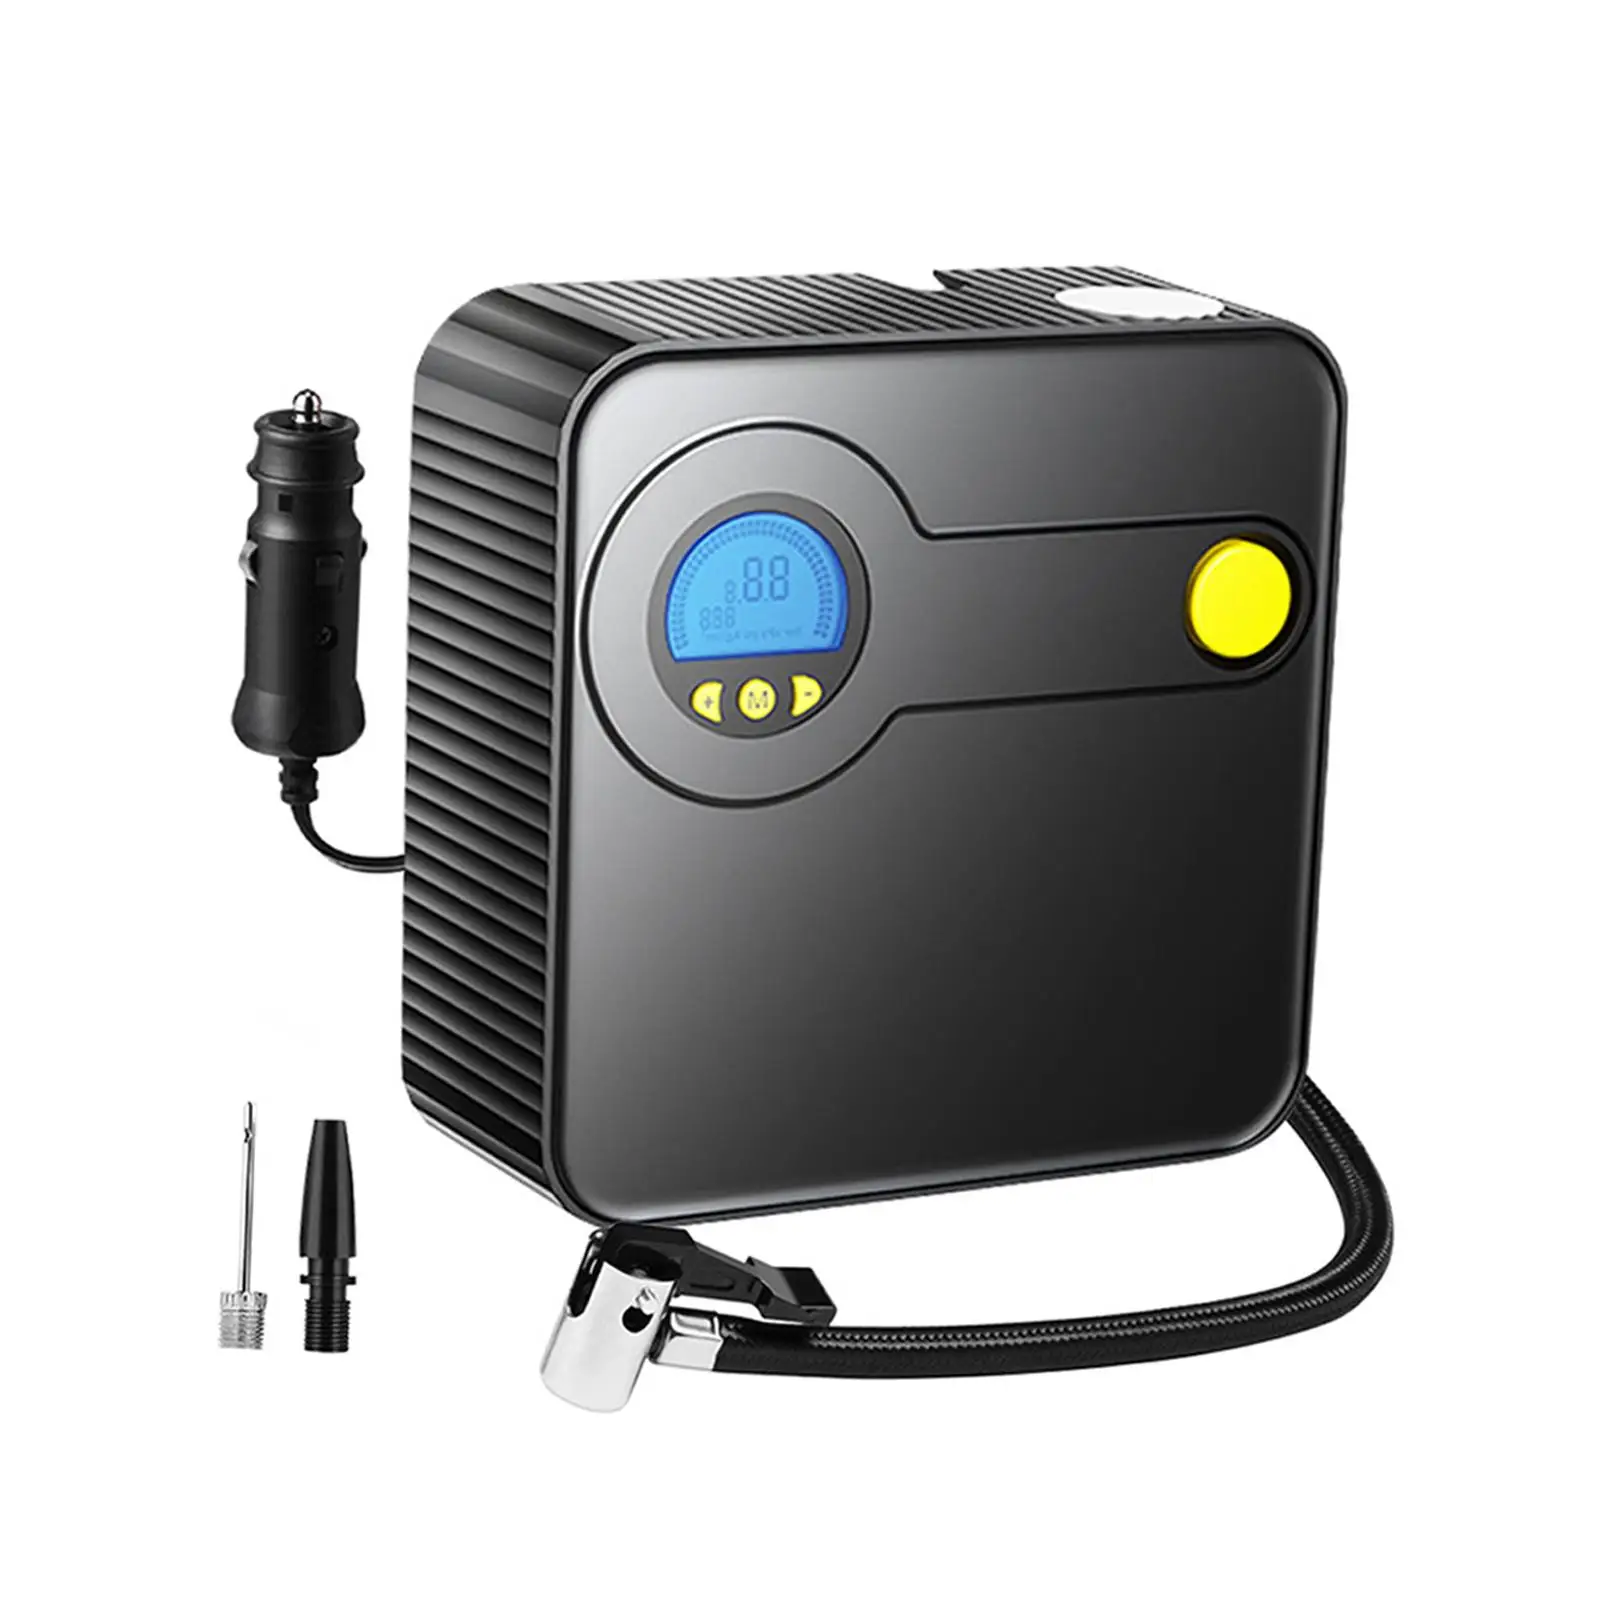 Car Air Compressor Tire Inflator Electric with LED Light Air Pump for Bicycle Inflatables Home